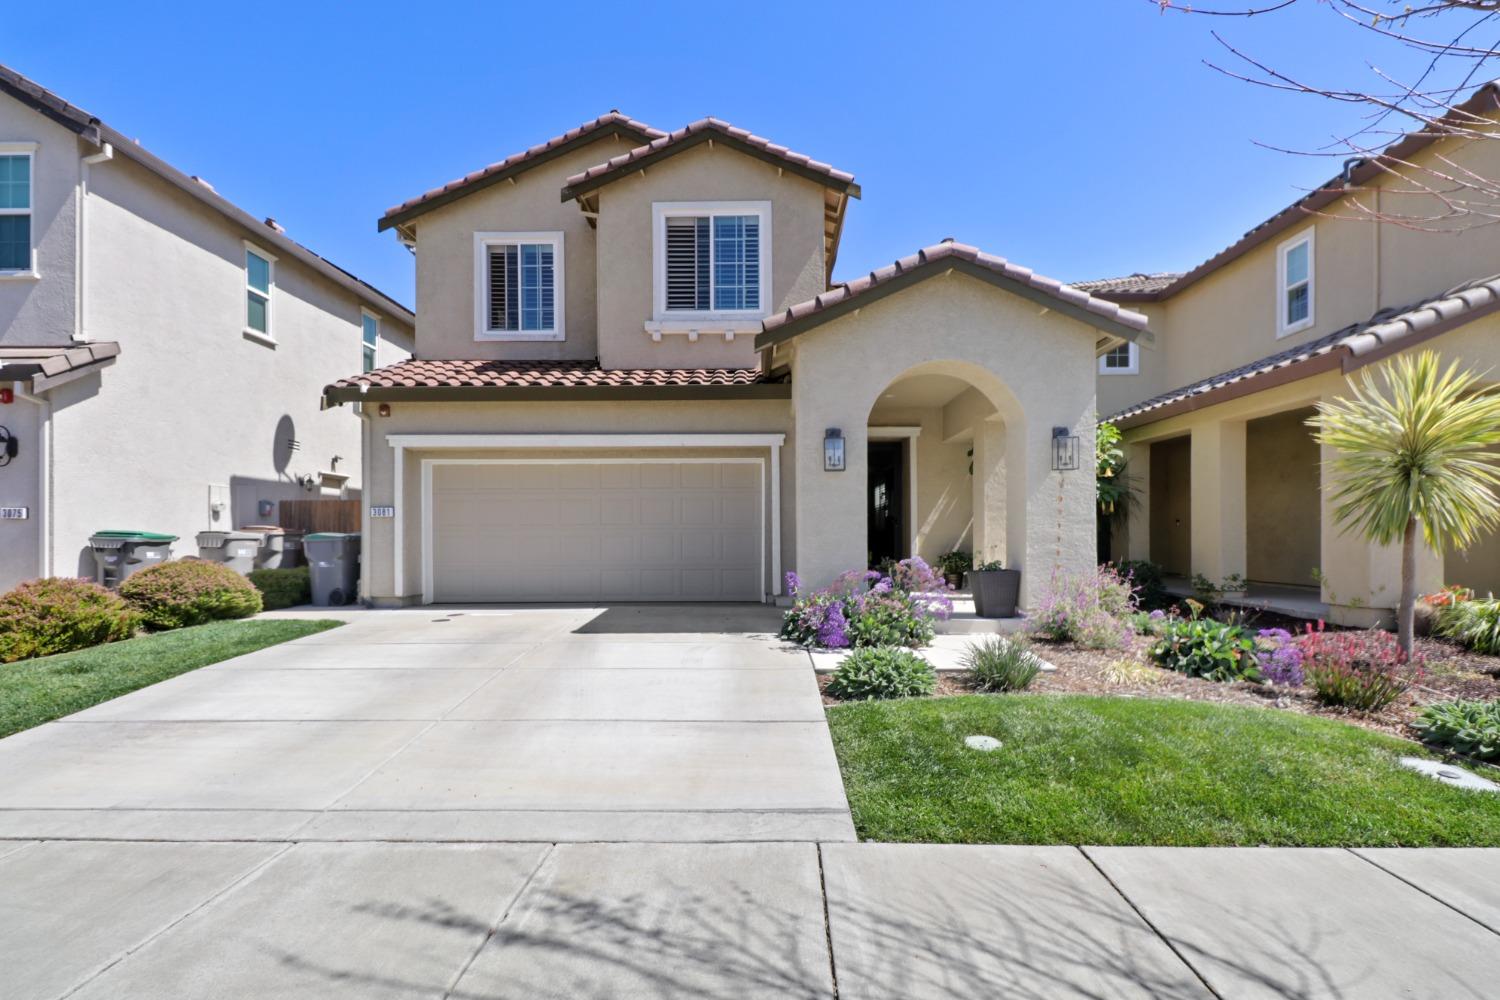 Photo of 3081 Mojave Dr in West Sacramento, CA